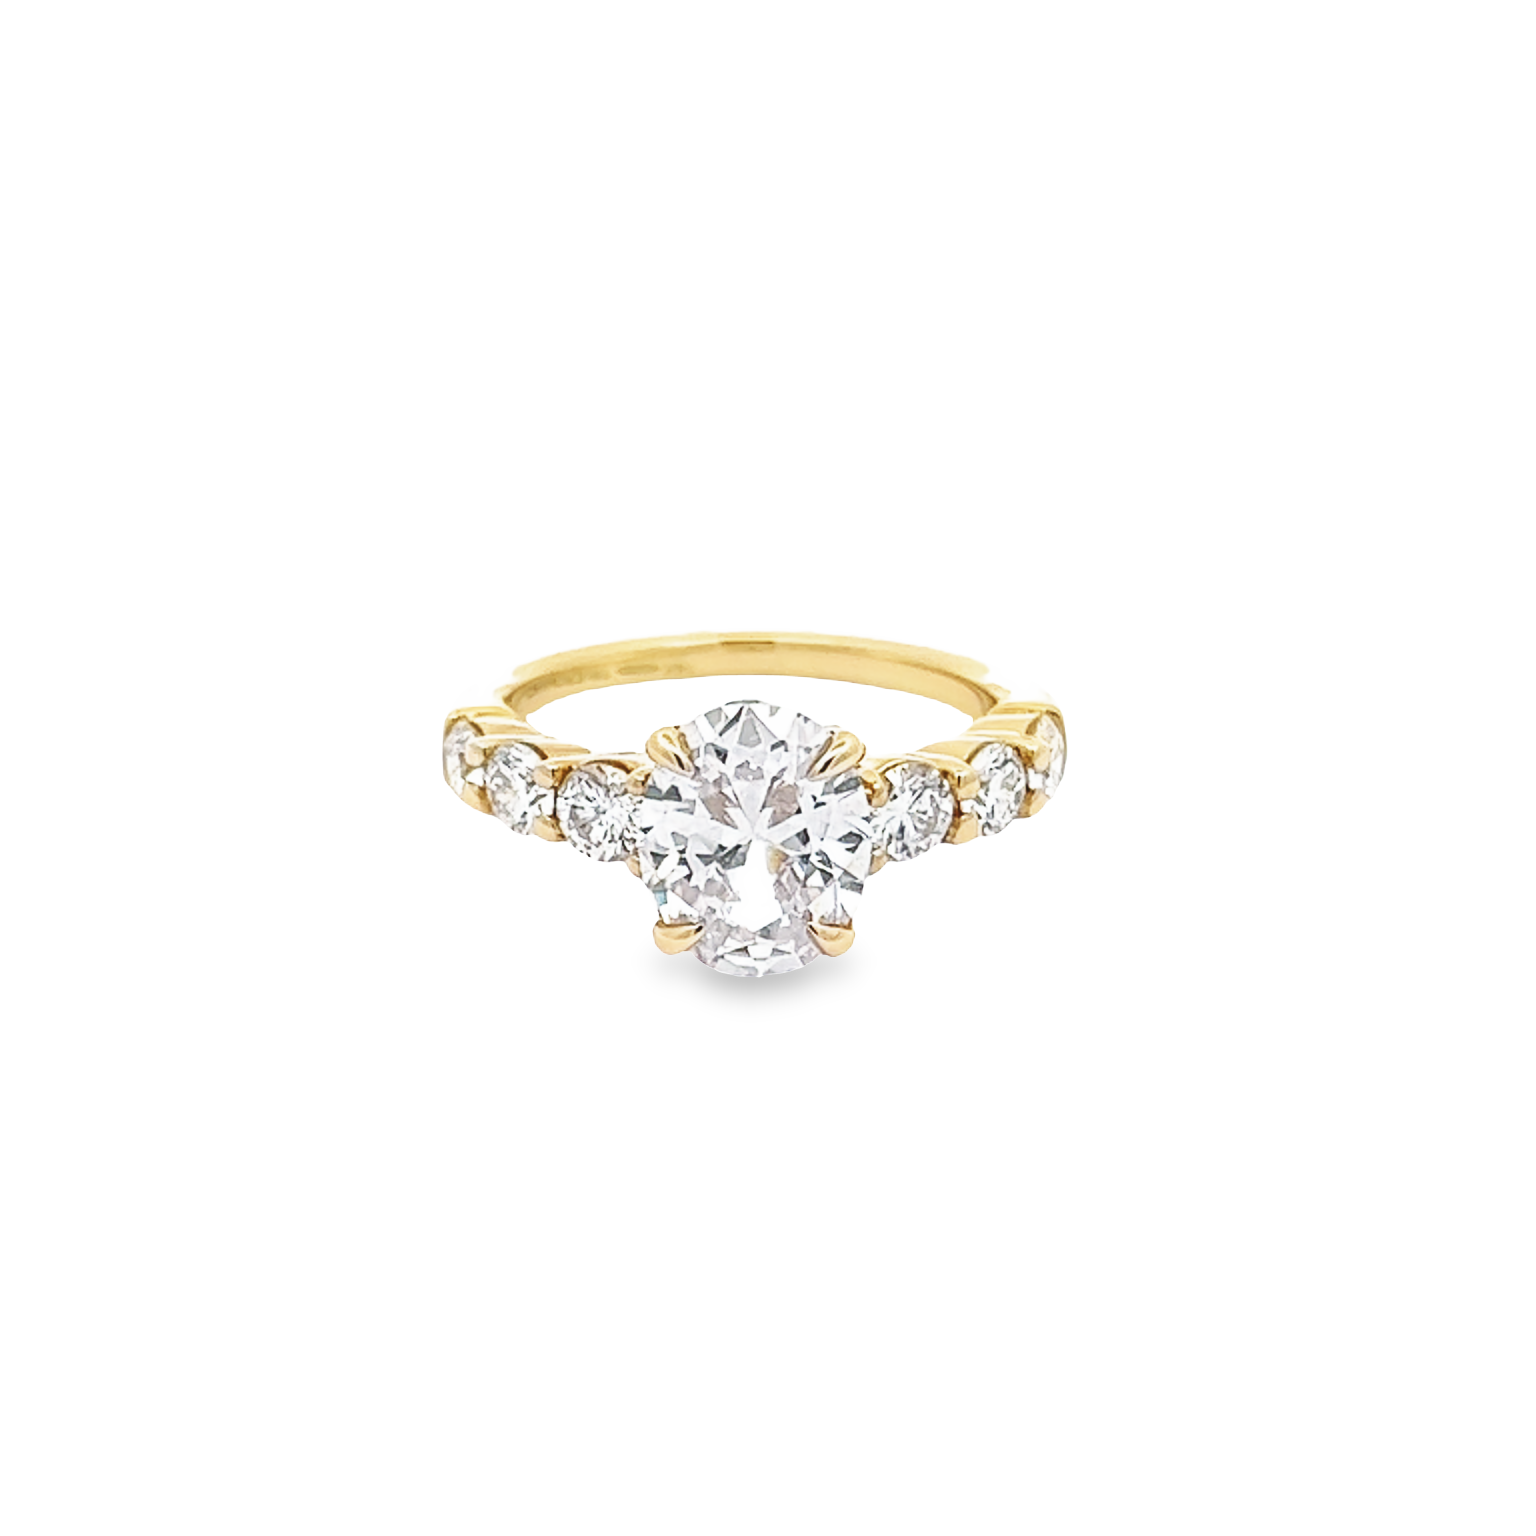 14 Karat yellow gold semi mount engagement ring with 6=0.96 total weight round brilliant G VS Diamonds. Size 7